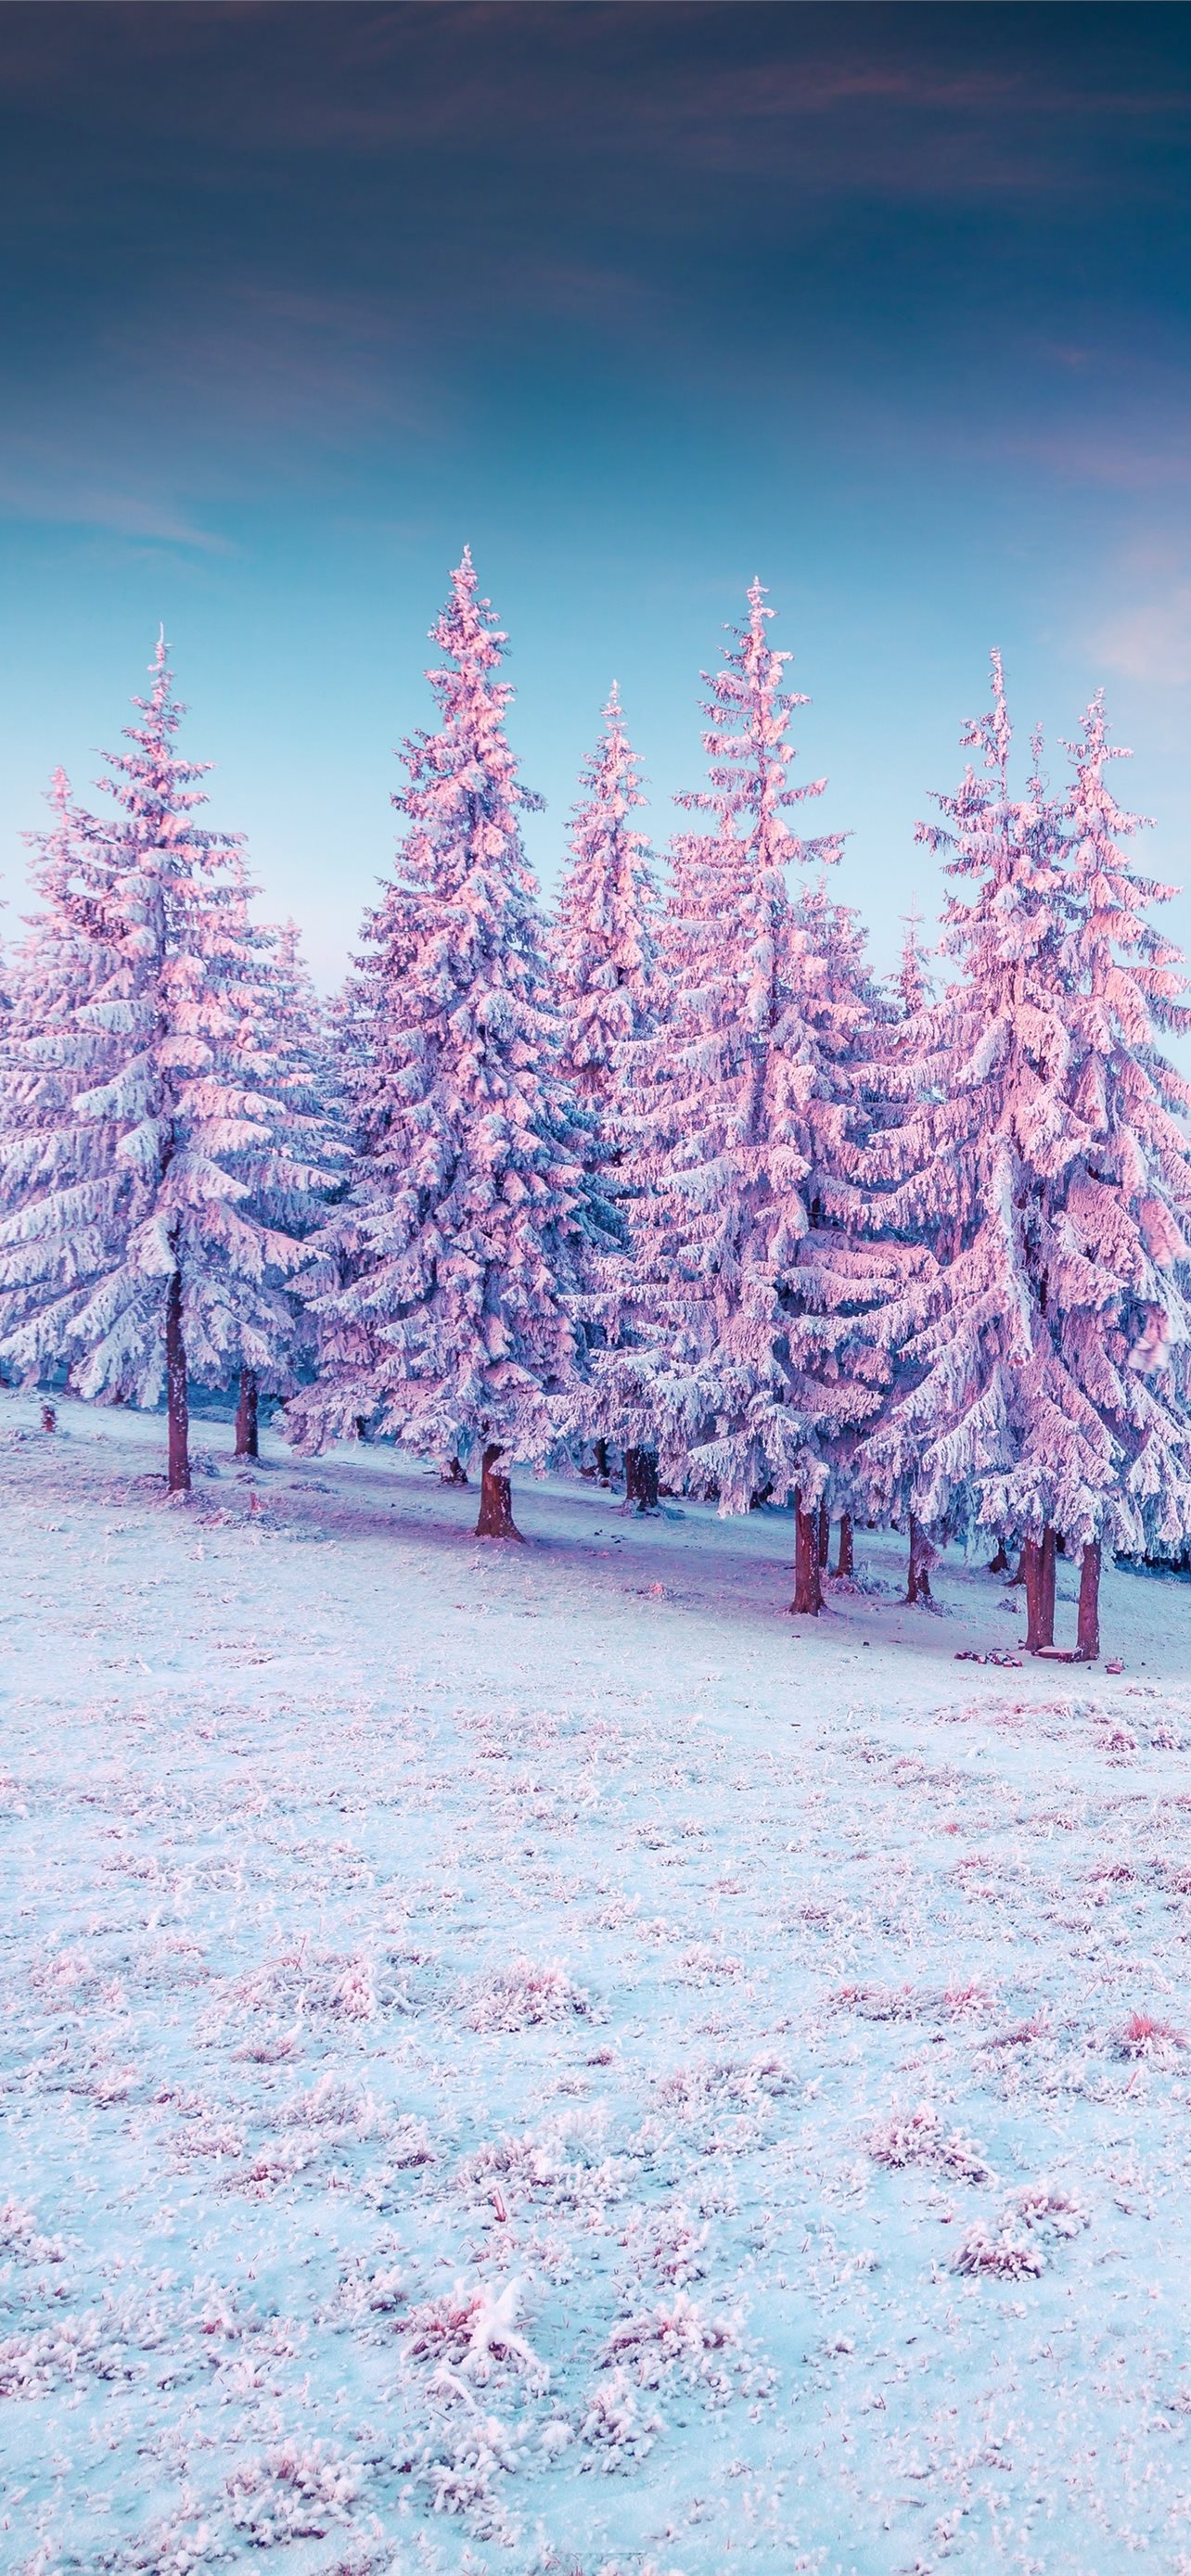 trees pink colorful cold hills snow 5k iPhone Wallpaper Free Download